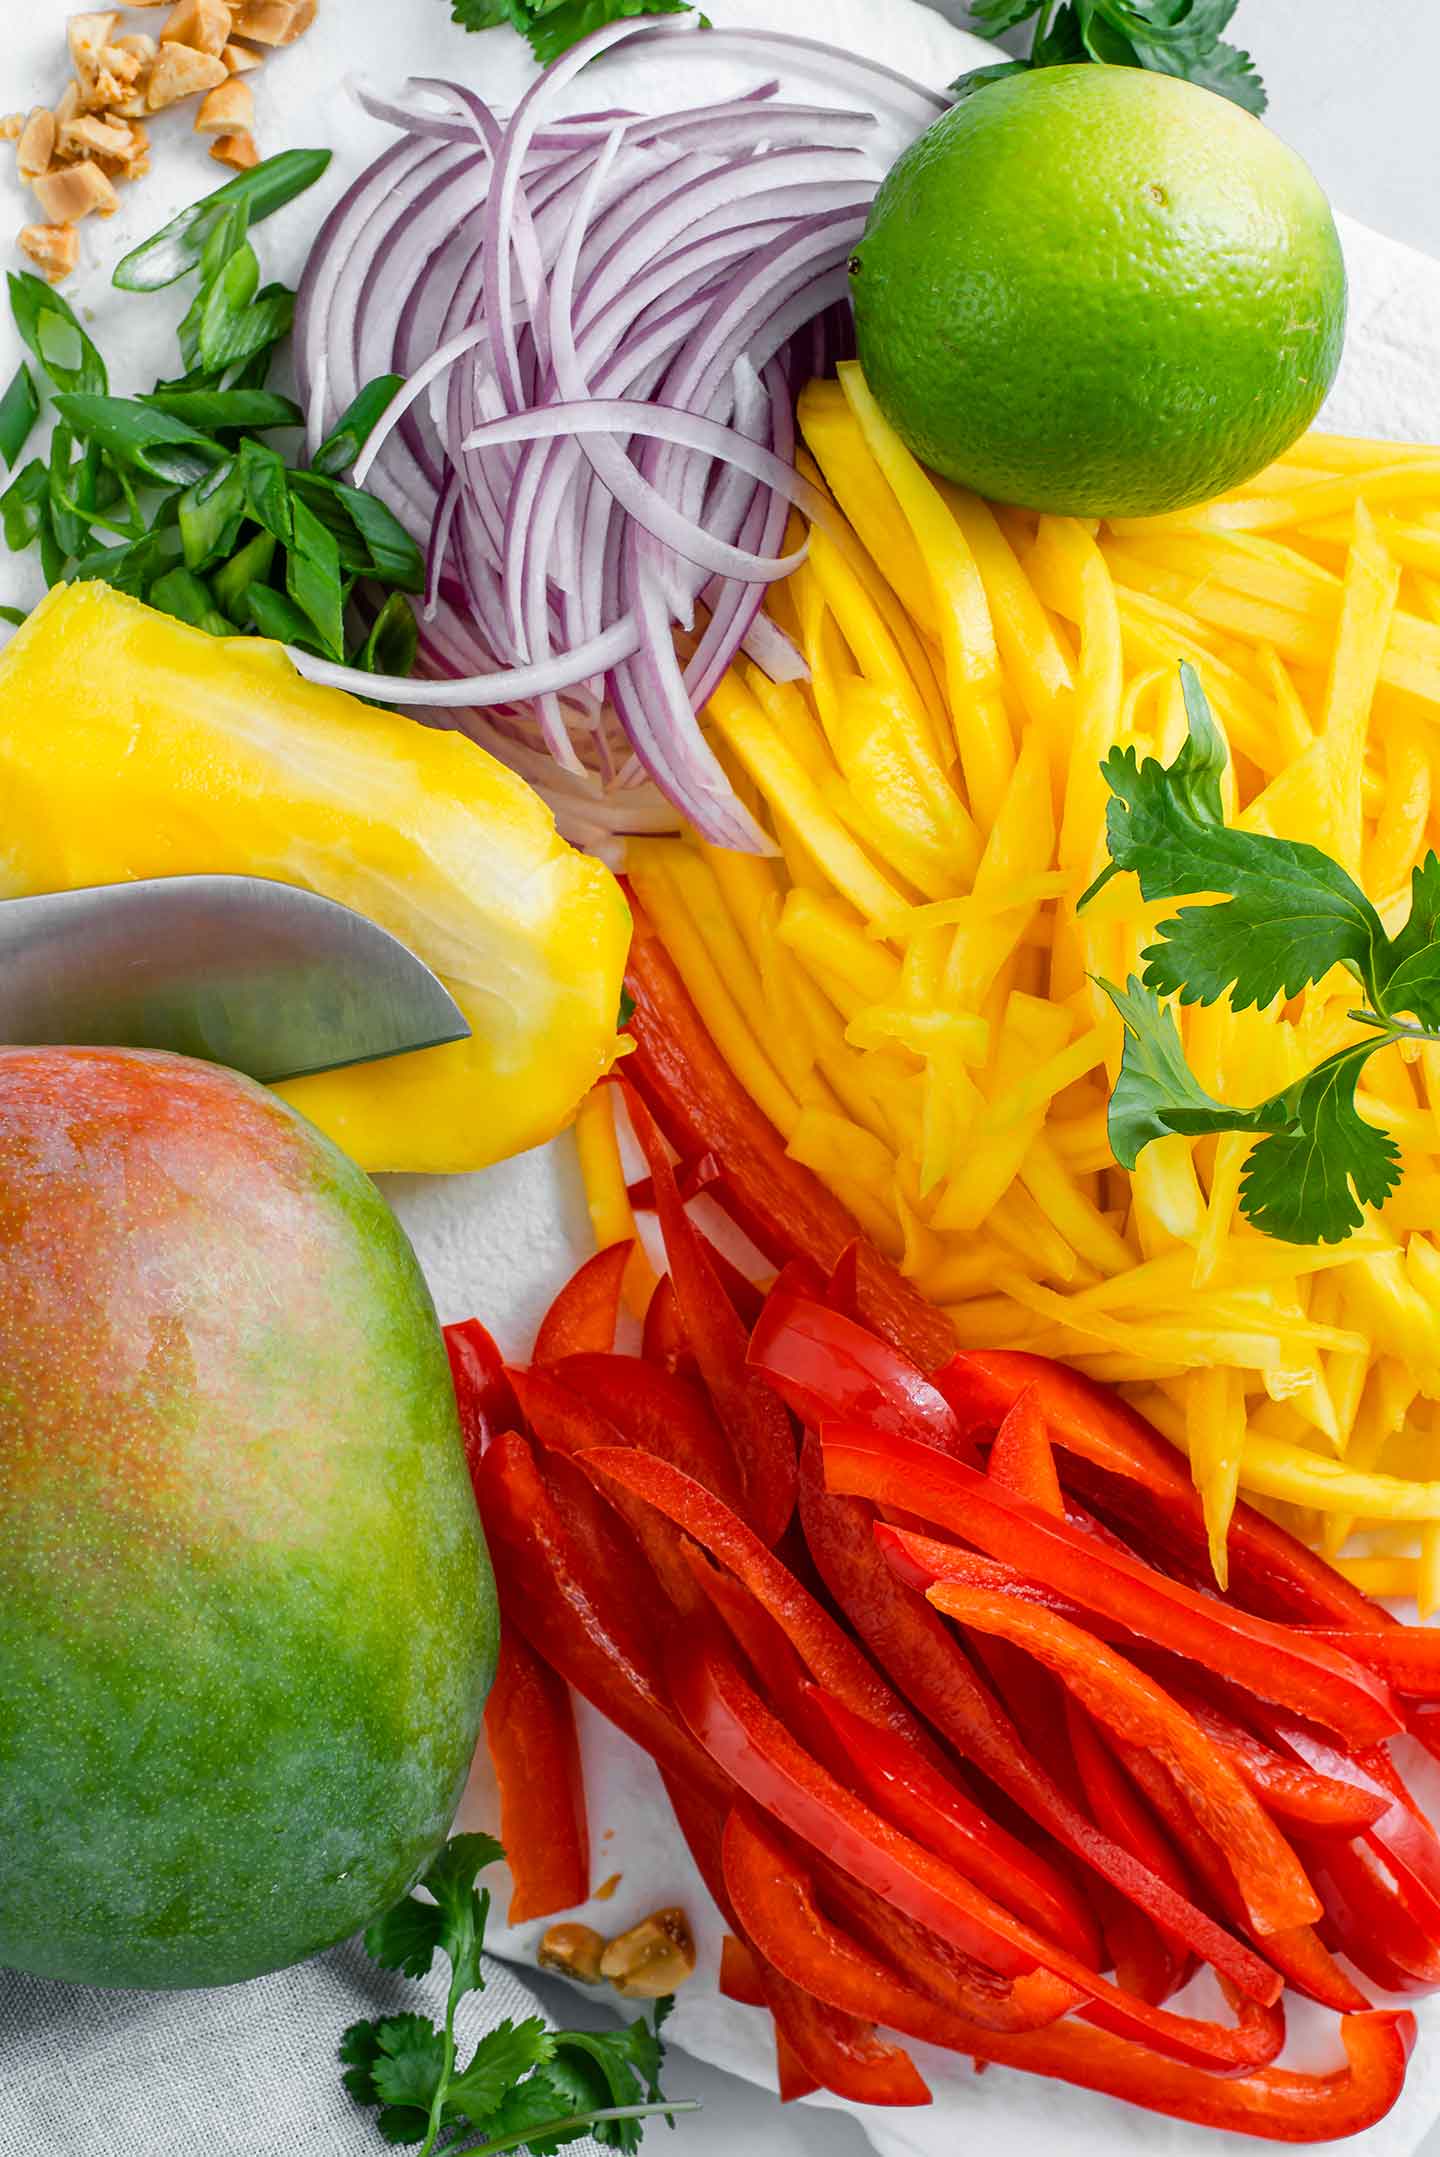 Top down view of a whole ripe mango, thinly sliced mango, sliced red pepper, sliced red onion, sliced green onion, a lime and cilantro leaves.